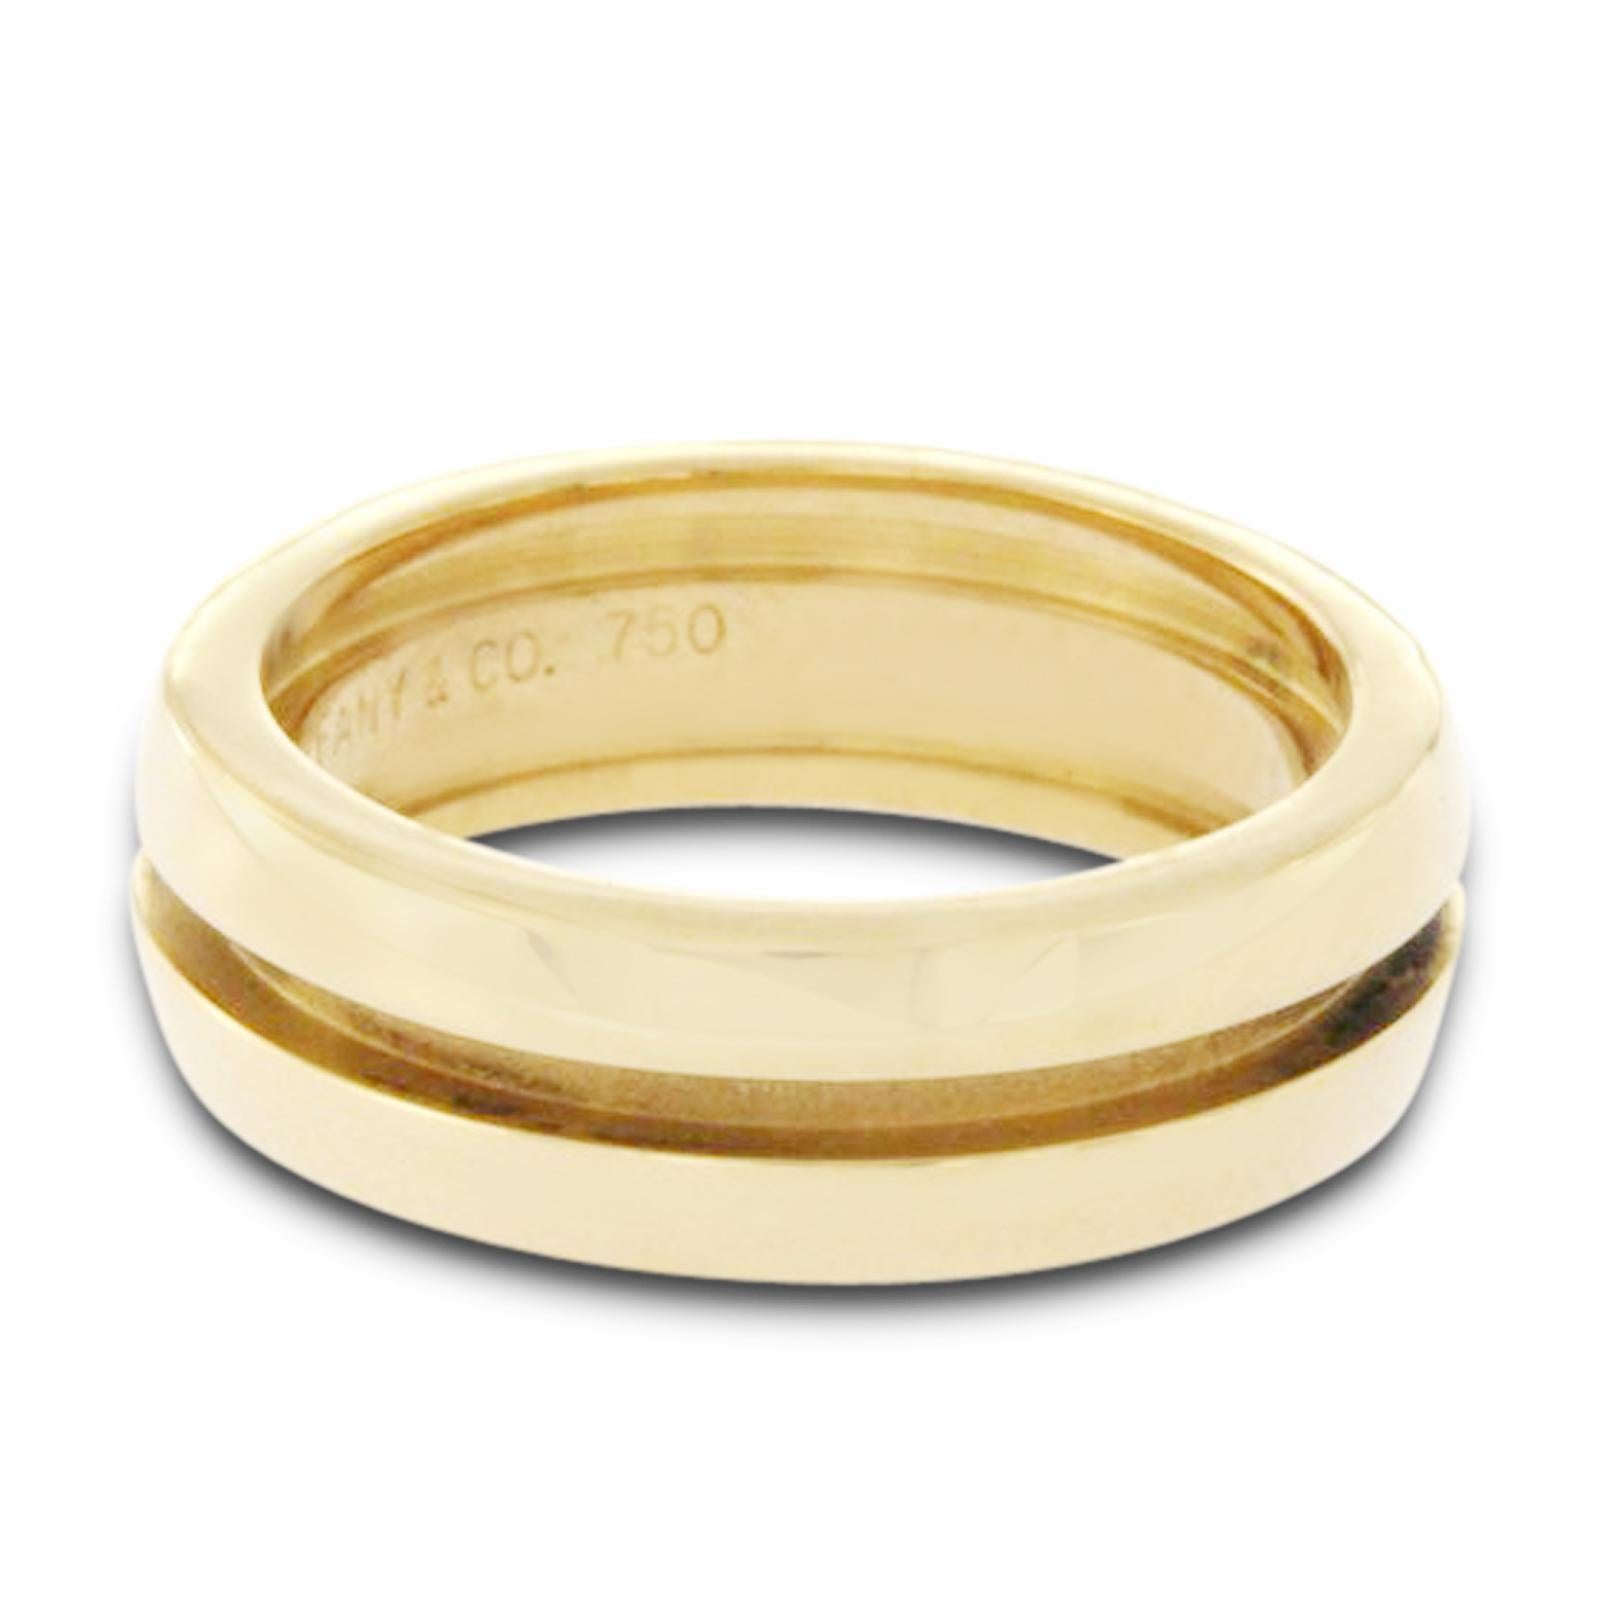 Top: 6 mm
Band Width: 6 mm
Metal: 18K Yellow Gold 
Size: 6
Hallmarks: Tiffany & Co 750
Total Weight: 7.7 Grams
Stone Type: None
Condition: Pre Owned
Estimated Retail Price: $3000
Stock Number: U423